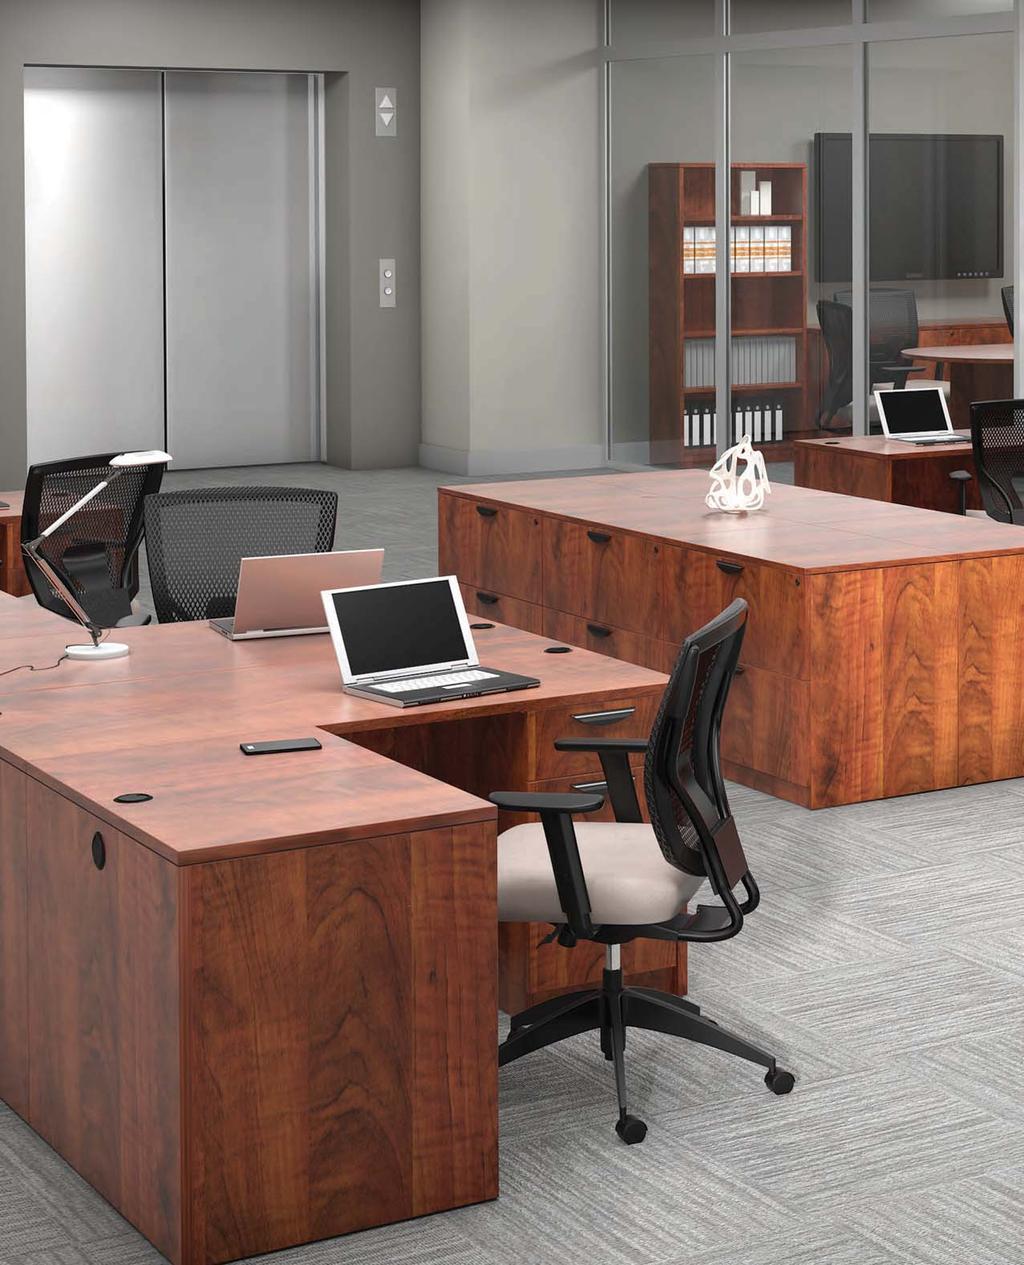 Affordable office furniture desks 888-442-8242 8242 GREENGUARD INDOOR AIR QUALITY CERTIFICATION All Offices To Go Superior Laminate Desking is in compliance with stringent emission guidelines set out